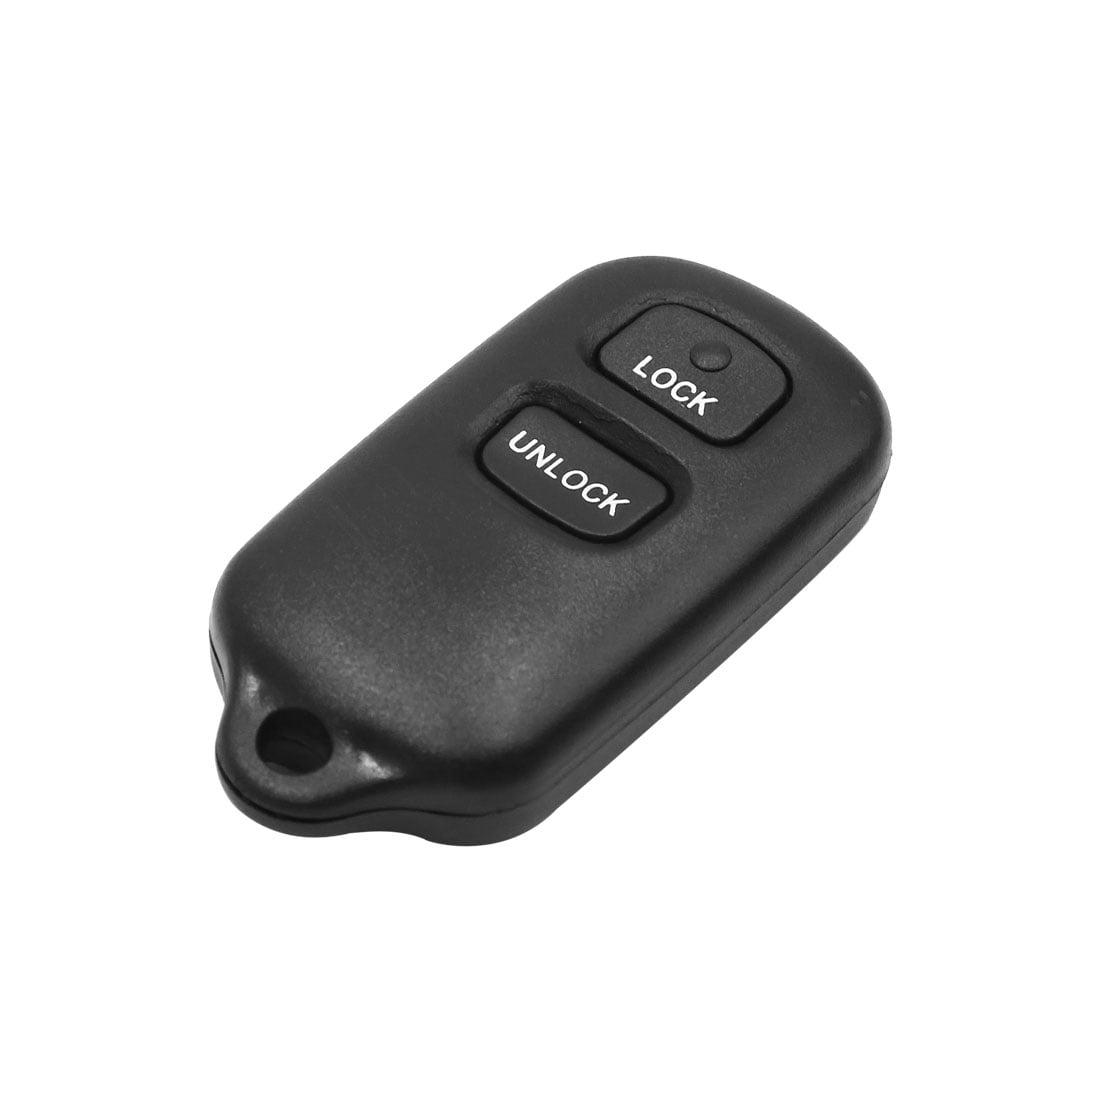 Remote Shell Keyless Entry Fob Case For Toyota Sienna 99-03 By Ri-Key Security